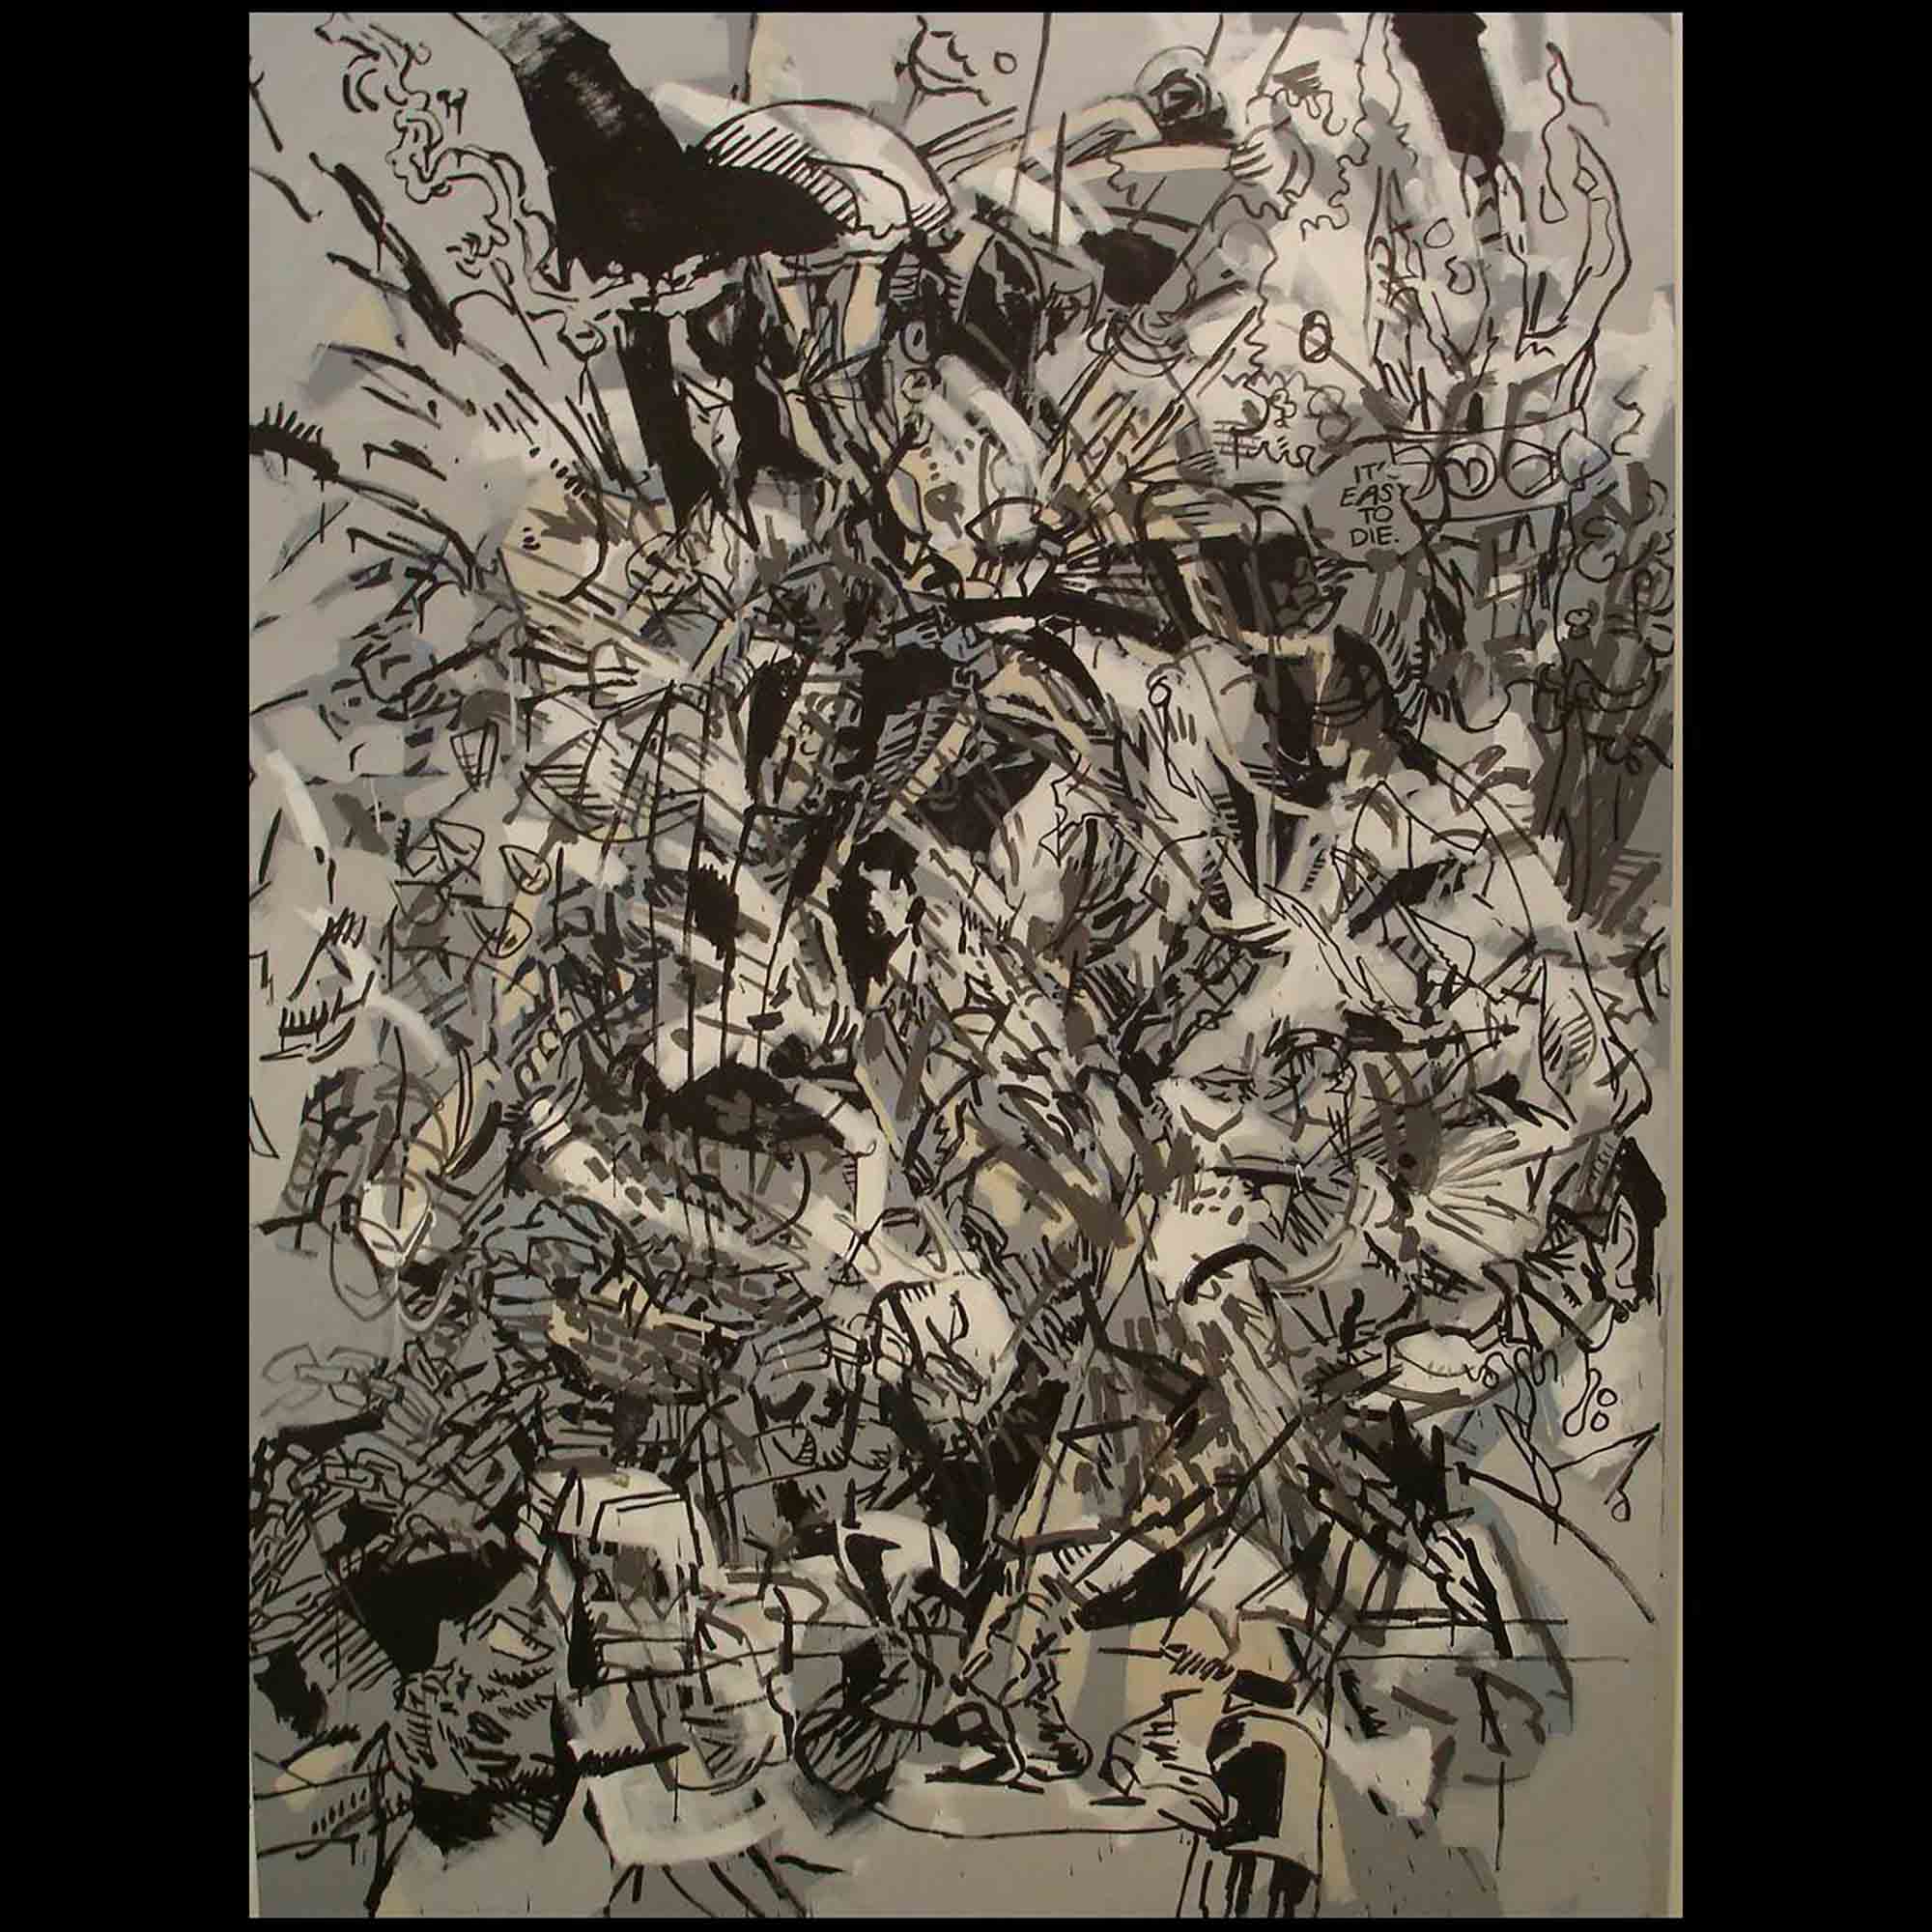 An abstract black and white paintings featuring gestural brush strokes layered with illustrations